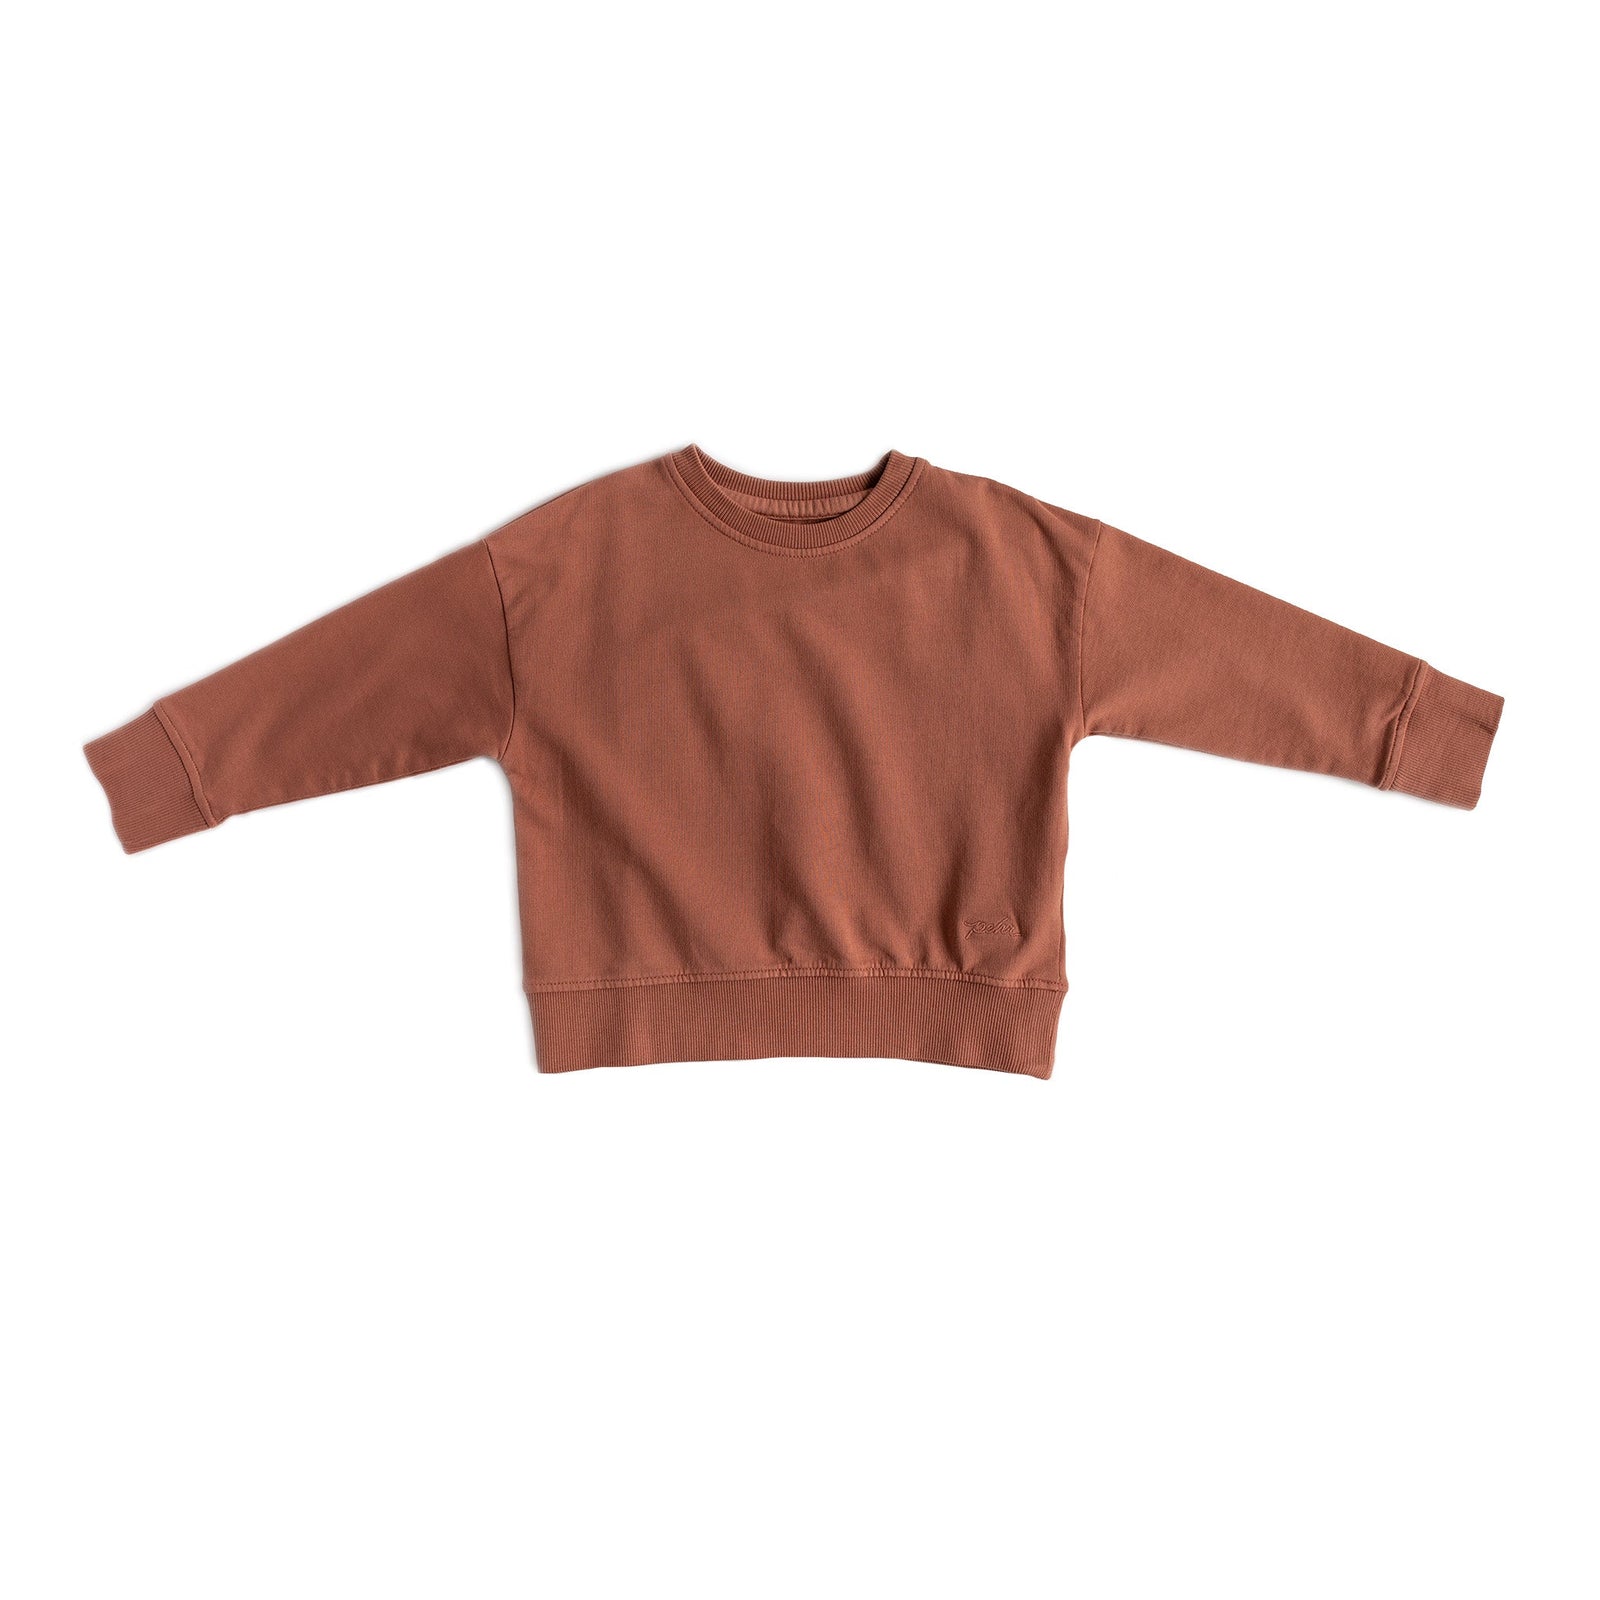 French Terry Sweatshirt Top Pehr Clay 18 - 24 mos. 